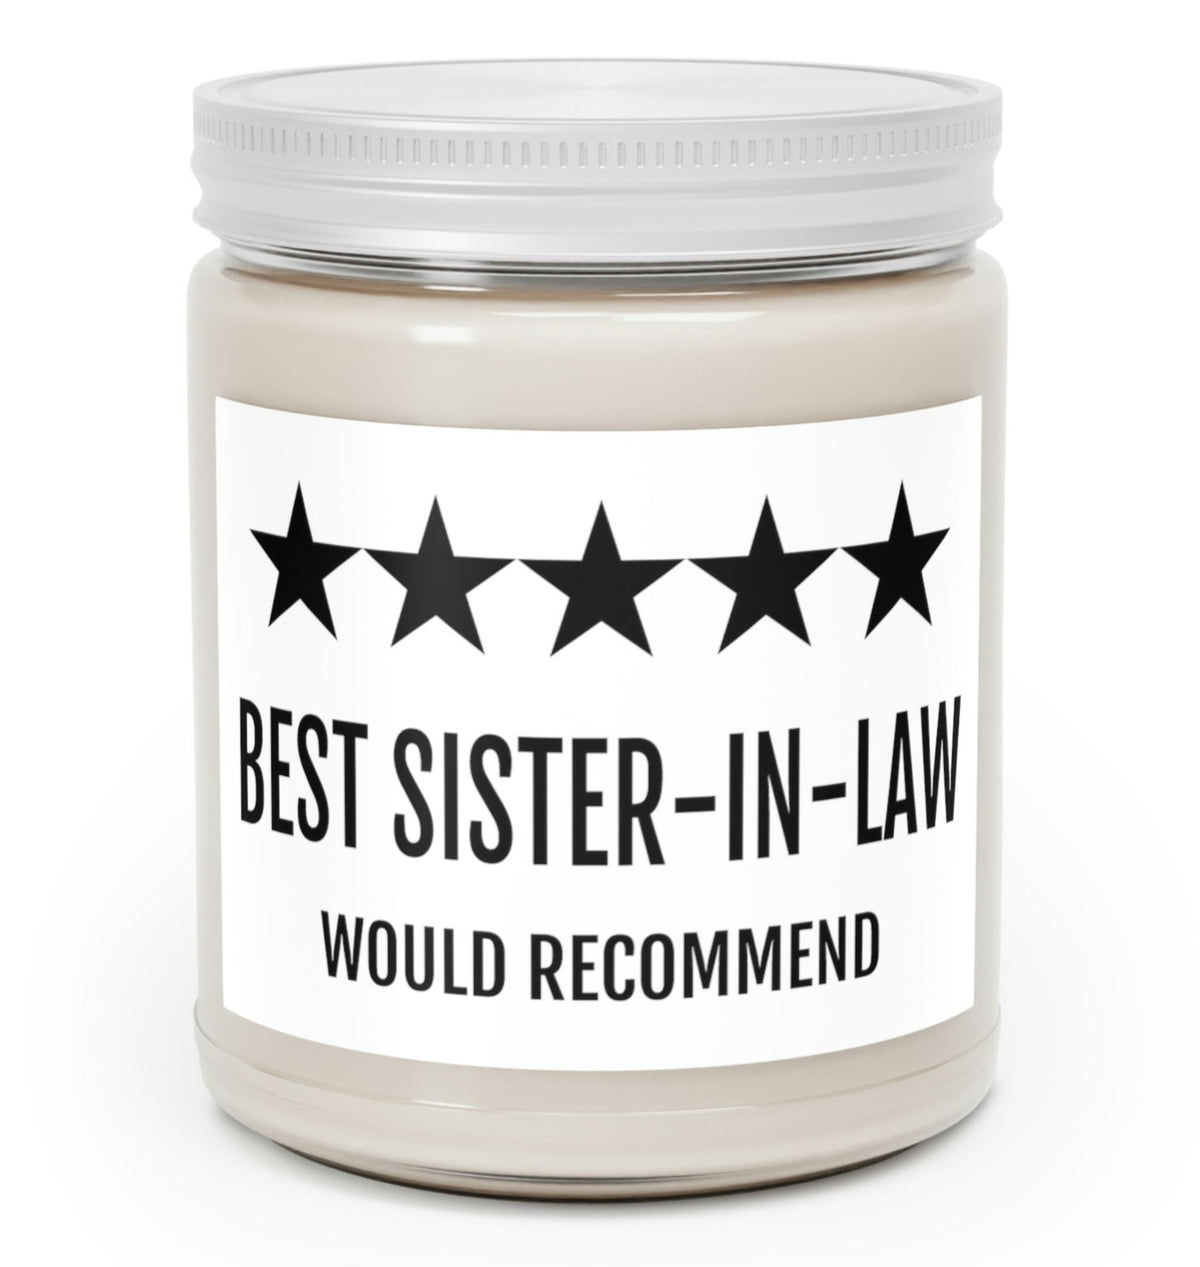 Best Sister-in-Law Candle, Would Recommend